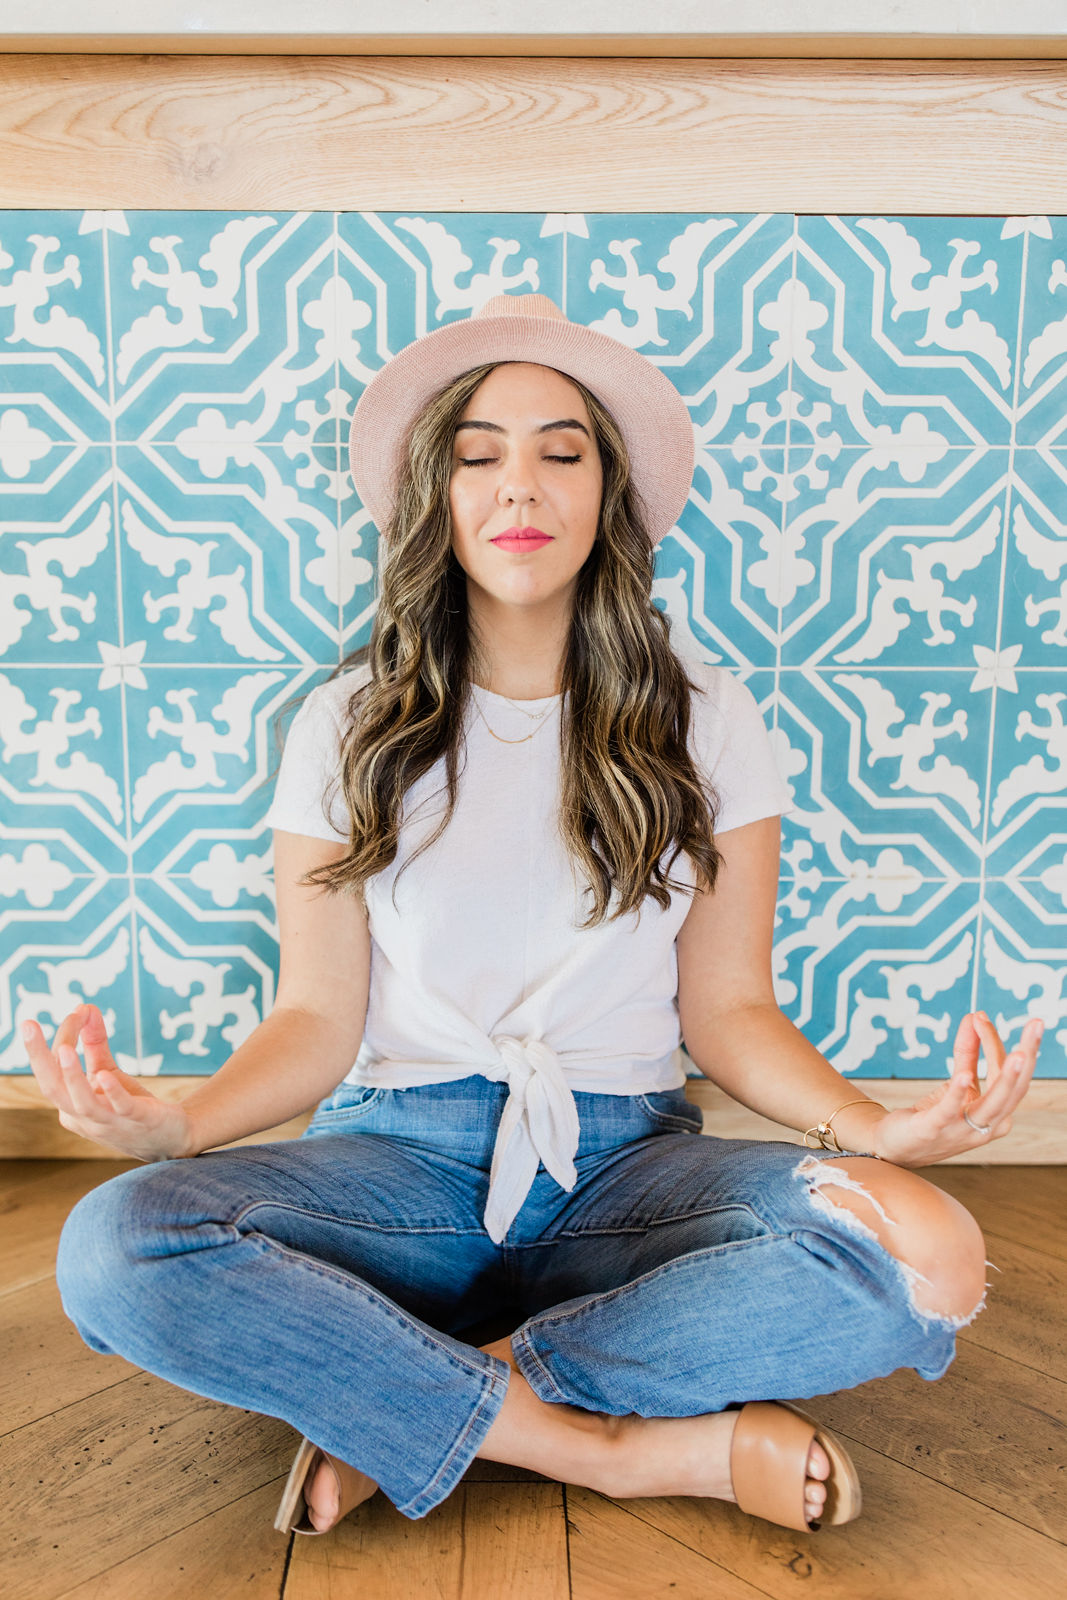 Mindfulness is the art of being present and doing everything with intention. Here's why you need to practice mindfulness in your business.